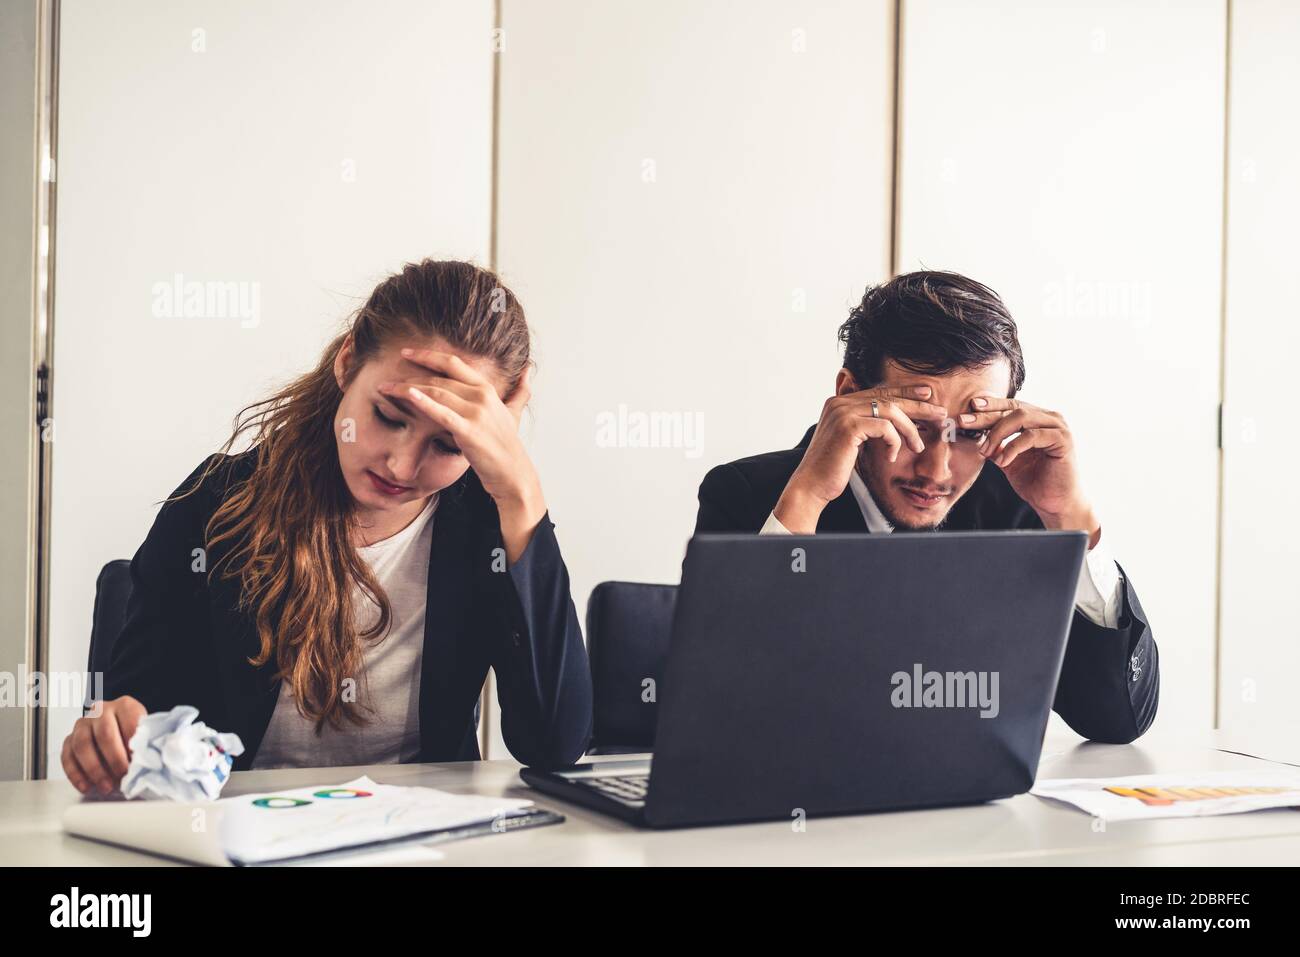 Unhappy serious businessman and businesswoman working using laptop computer on the office desk. Bad business crisis situation and bankruptcy concept. Stock Photo